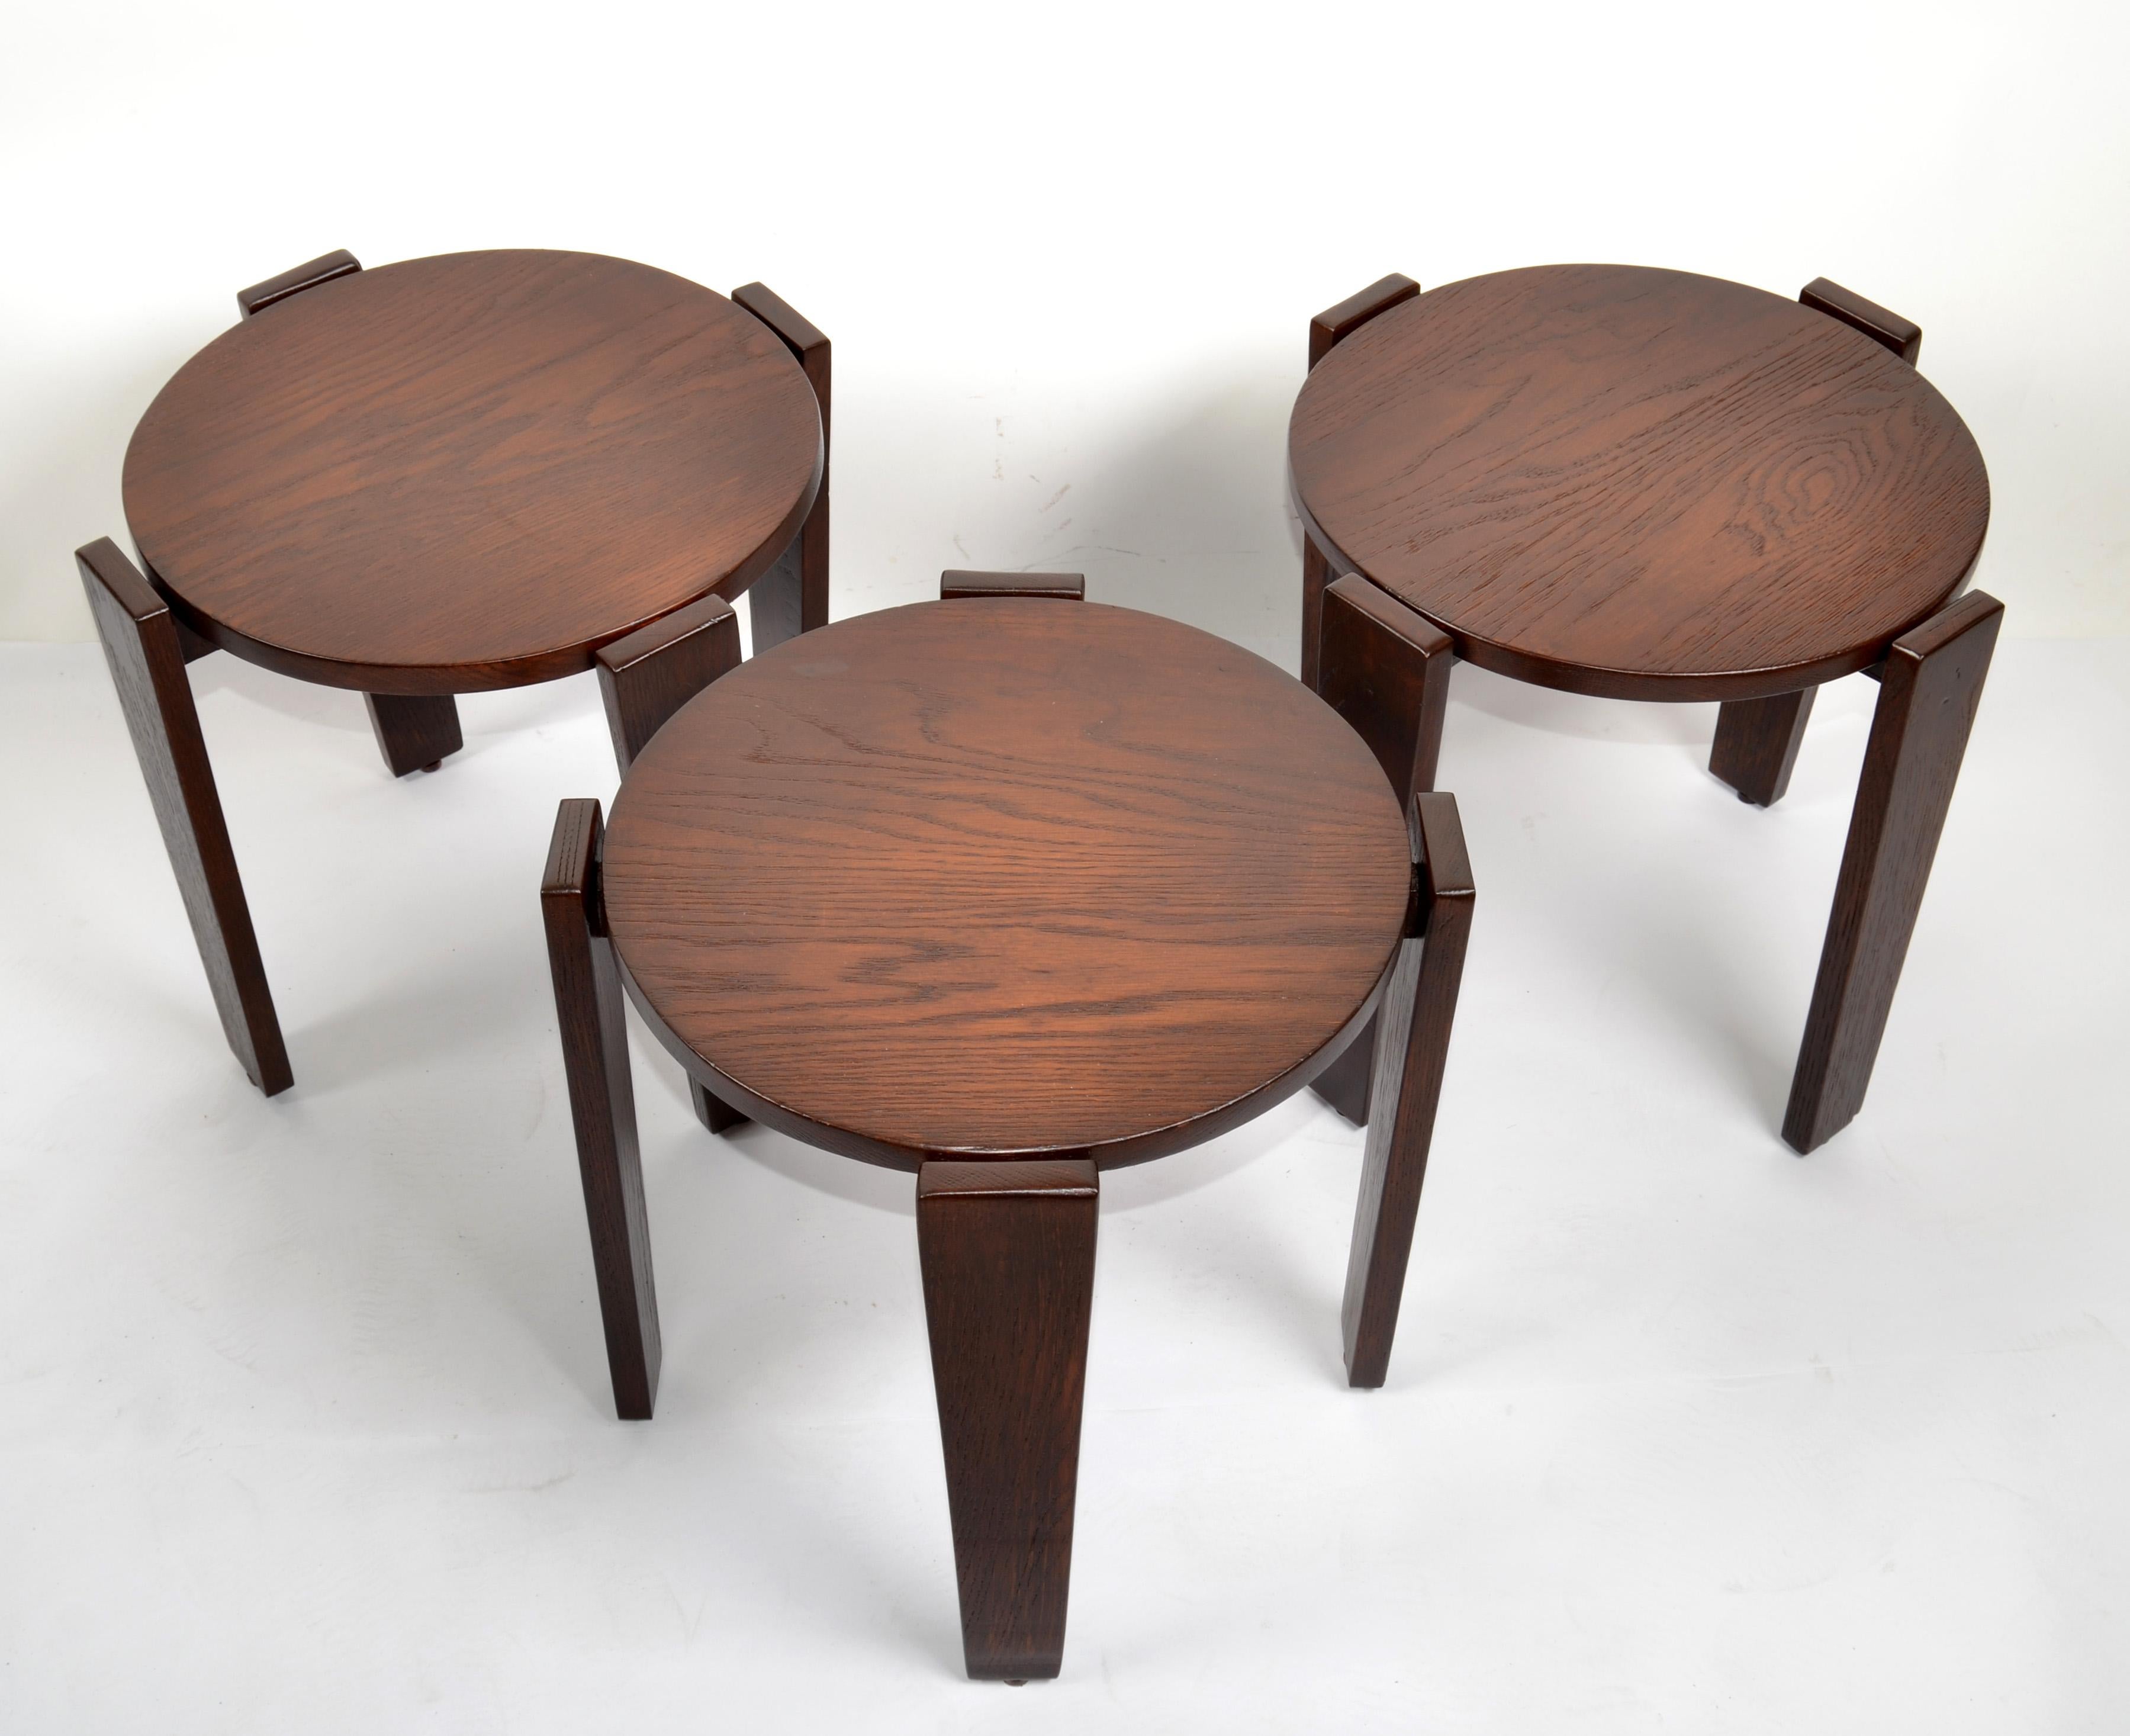 Set of 3 Bauhaus Style classic handcrafted Walnut Nesting Tables, Stacking Tables, Stools.
Attributed to Bruno Rey by Dietiker, made in the USA.
Good condition and ready for a new Home.
Size of stacked table:
18.5 inches Height x 16.75 inches x 17